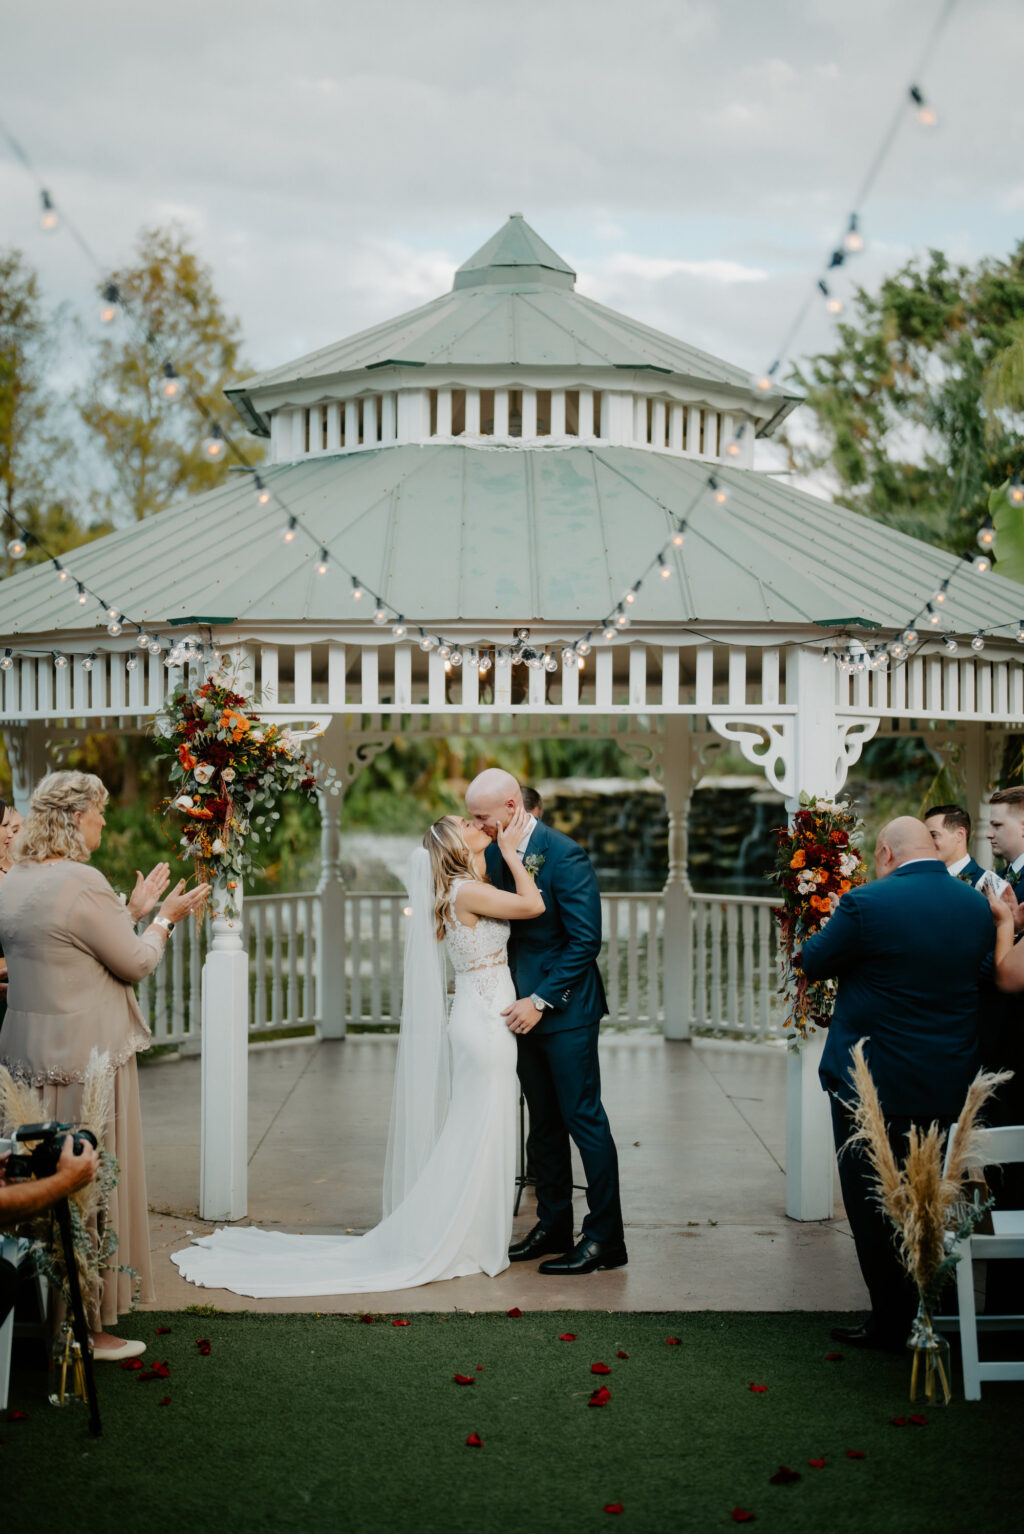 Bride and Groom First Kiss After Vows Under Outdoor Wedding Ceremony with White Gazebo and White Folding Chairs | Sarasota Florist Beneva Weddings